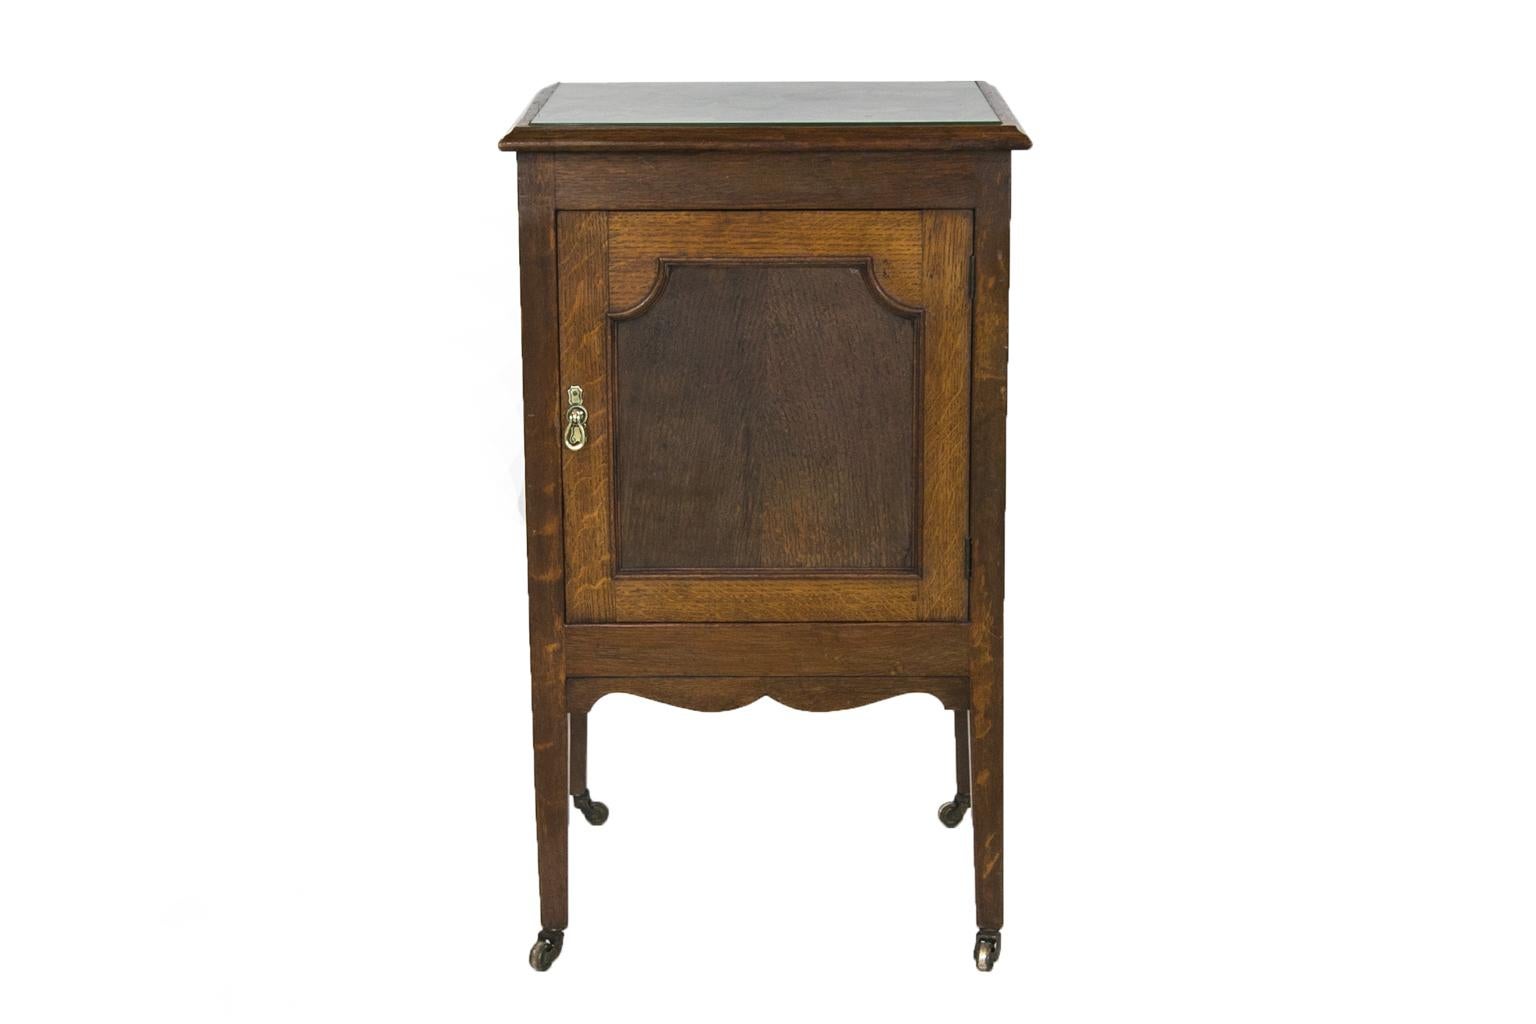 This cupboard has a top that has an inset panel covered with a floral fabric protected by a glass top, which is later. It has an ogee molded frame. The door has a recessed panel framed by a shaped molding. The sides also have recessed panels. The